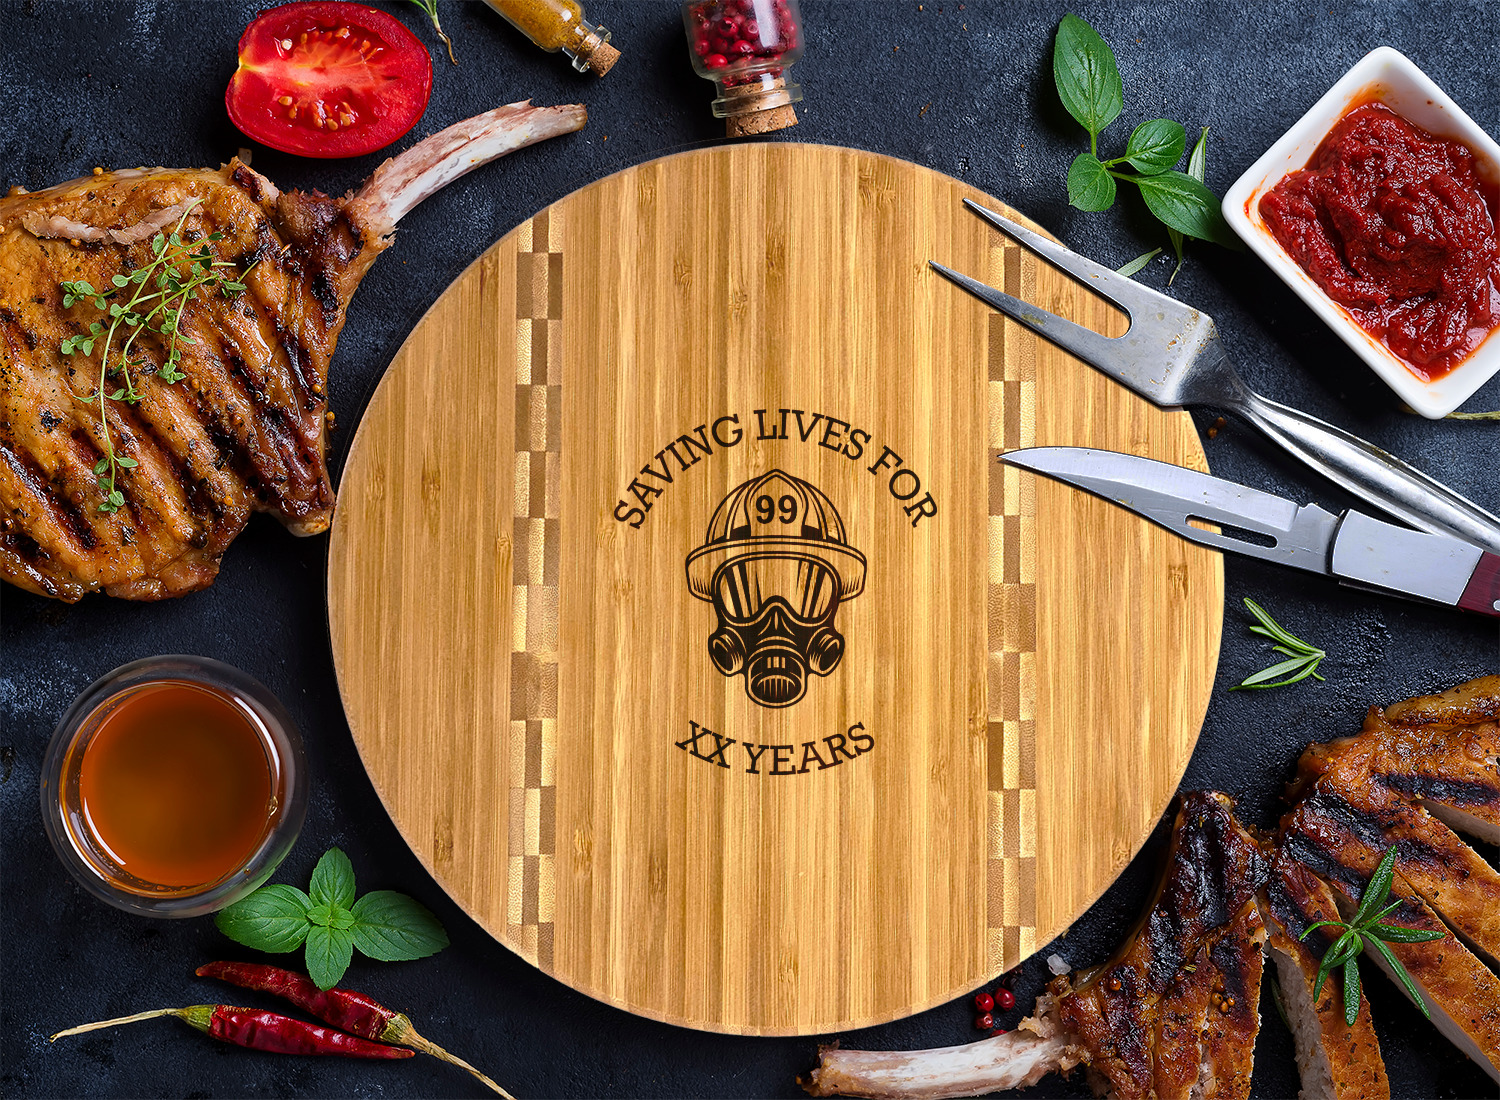 https://www.youcustomizeit.com/common/MAKE/1960007/Firefighter-Bamboo-Cutting-Boards-LIFESTYLE.jpg?lm=1658265394